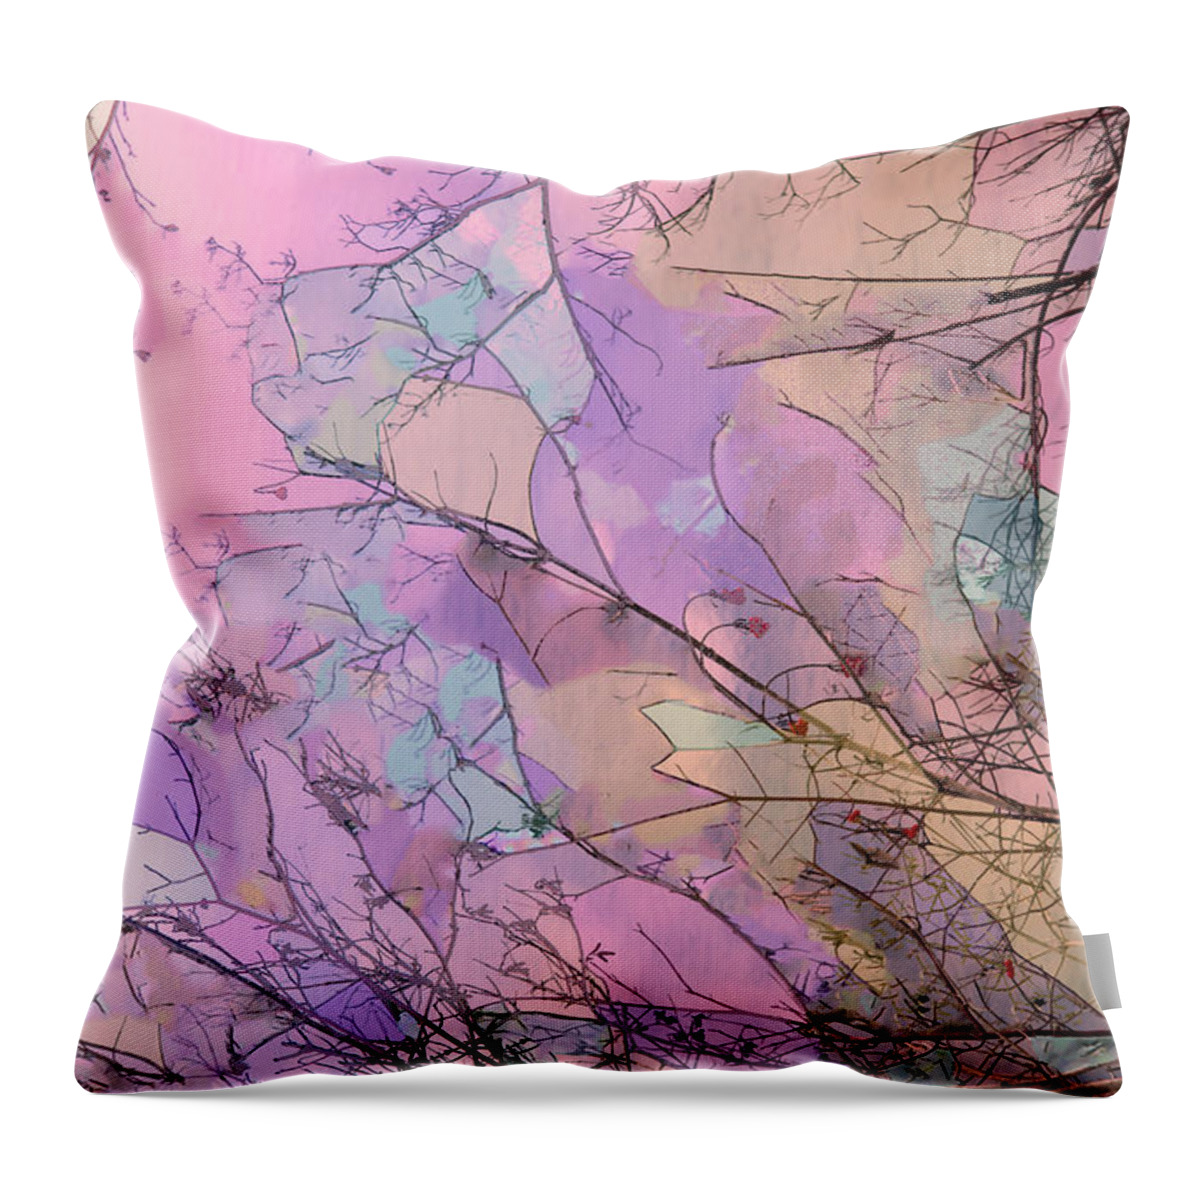 Water Throw Pillow featuring the photograph Rapture by Kathy Bassett